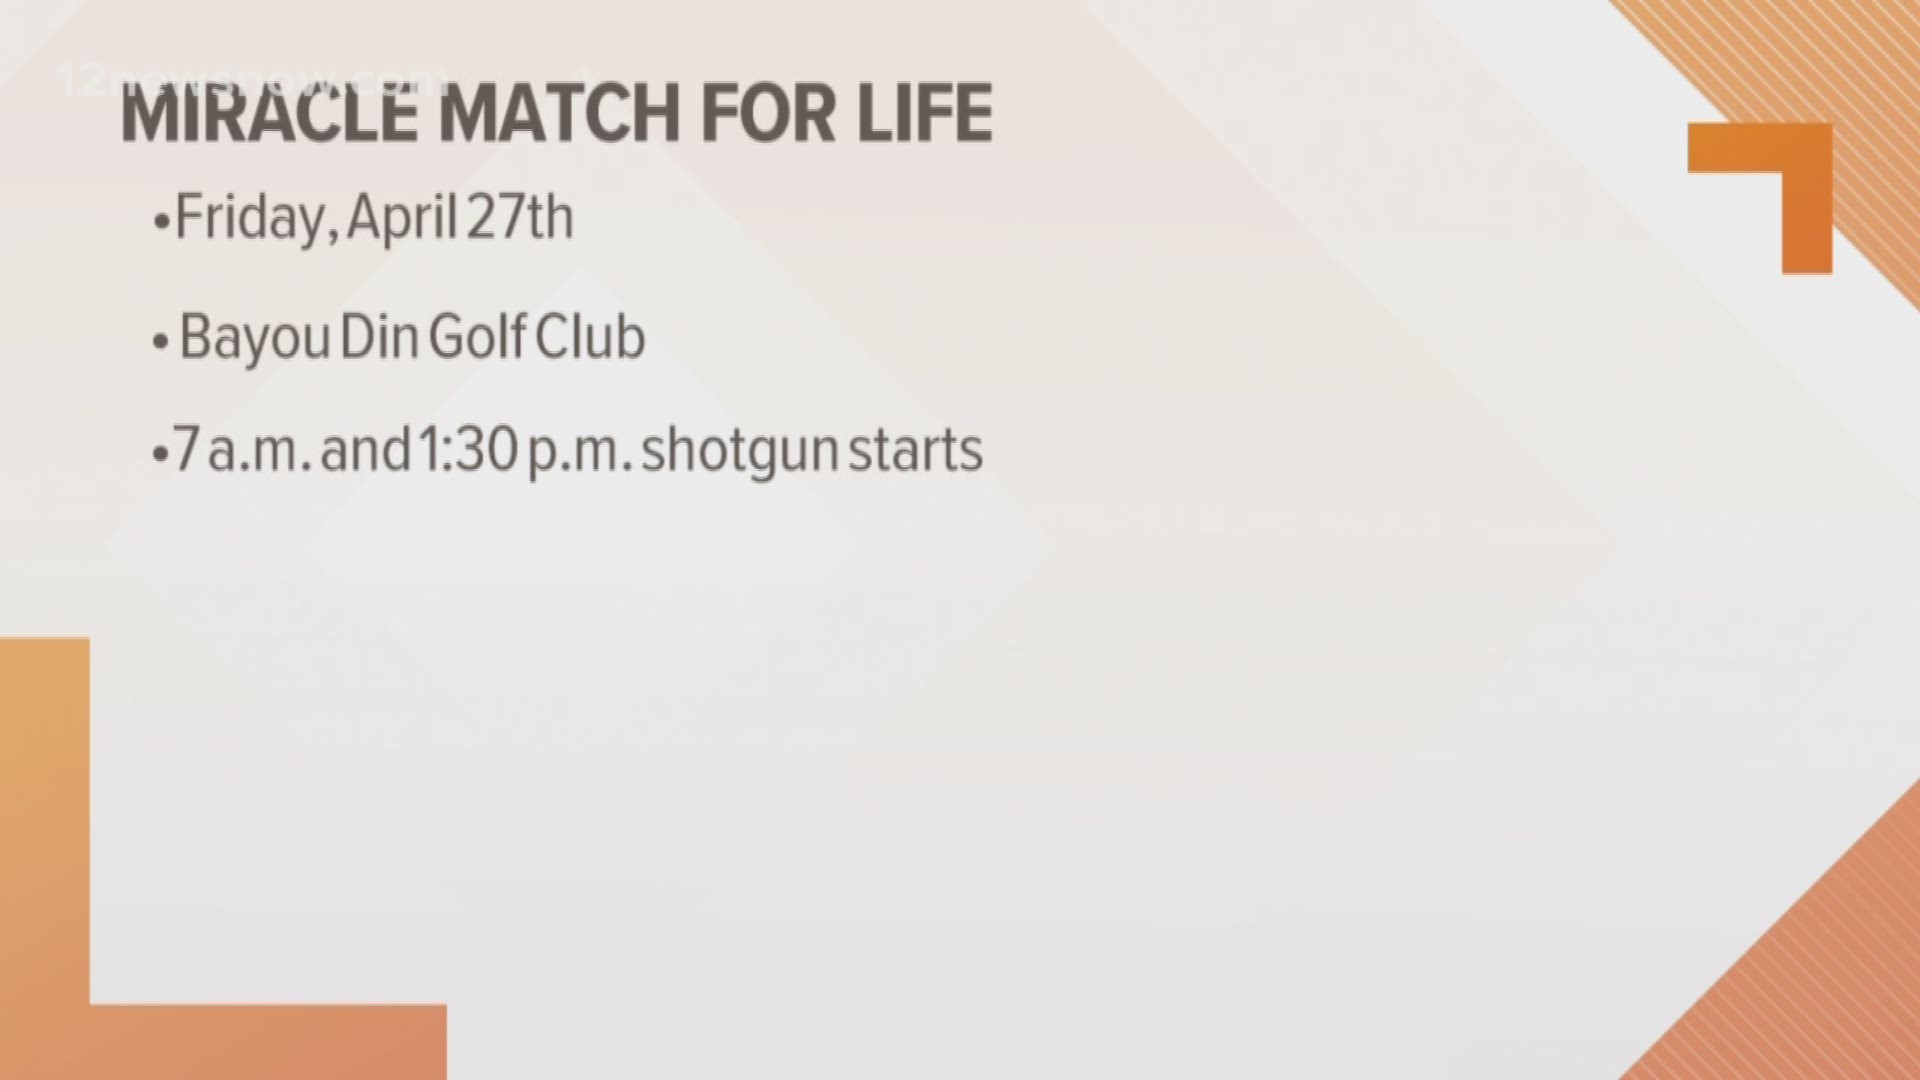 The 16th Annual Miracle Match for Life Golf Tournament benefiting the Gulf Coast Marrow Donor Program, the Julie Rogers "Gift of Life" Program and LifeShare Blood Centers will be held Friday, April 27, at the Bayou Din Golf Club at 853p7 Labelle Road in B